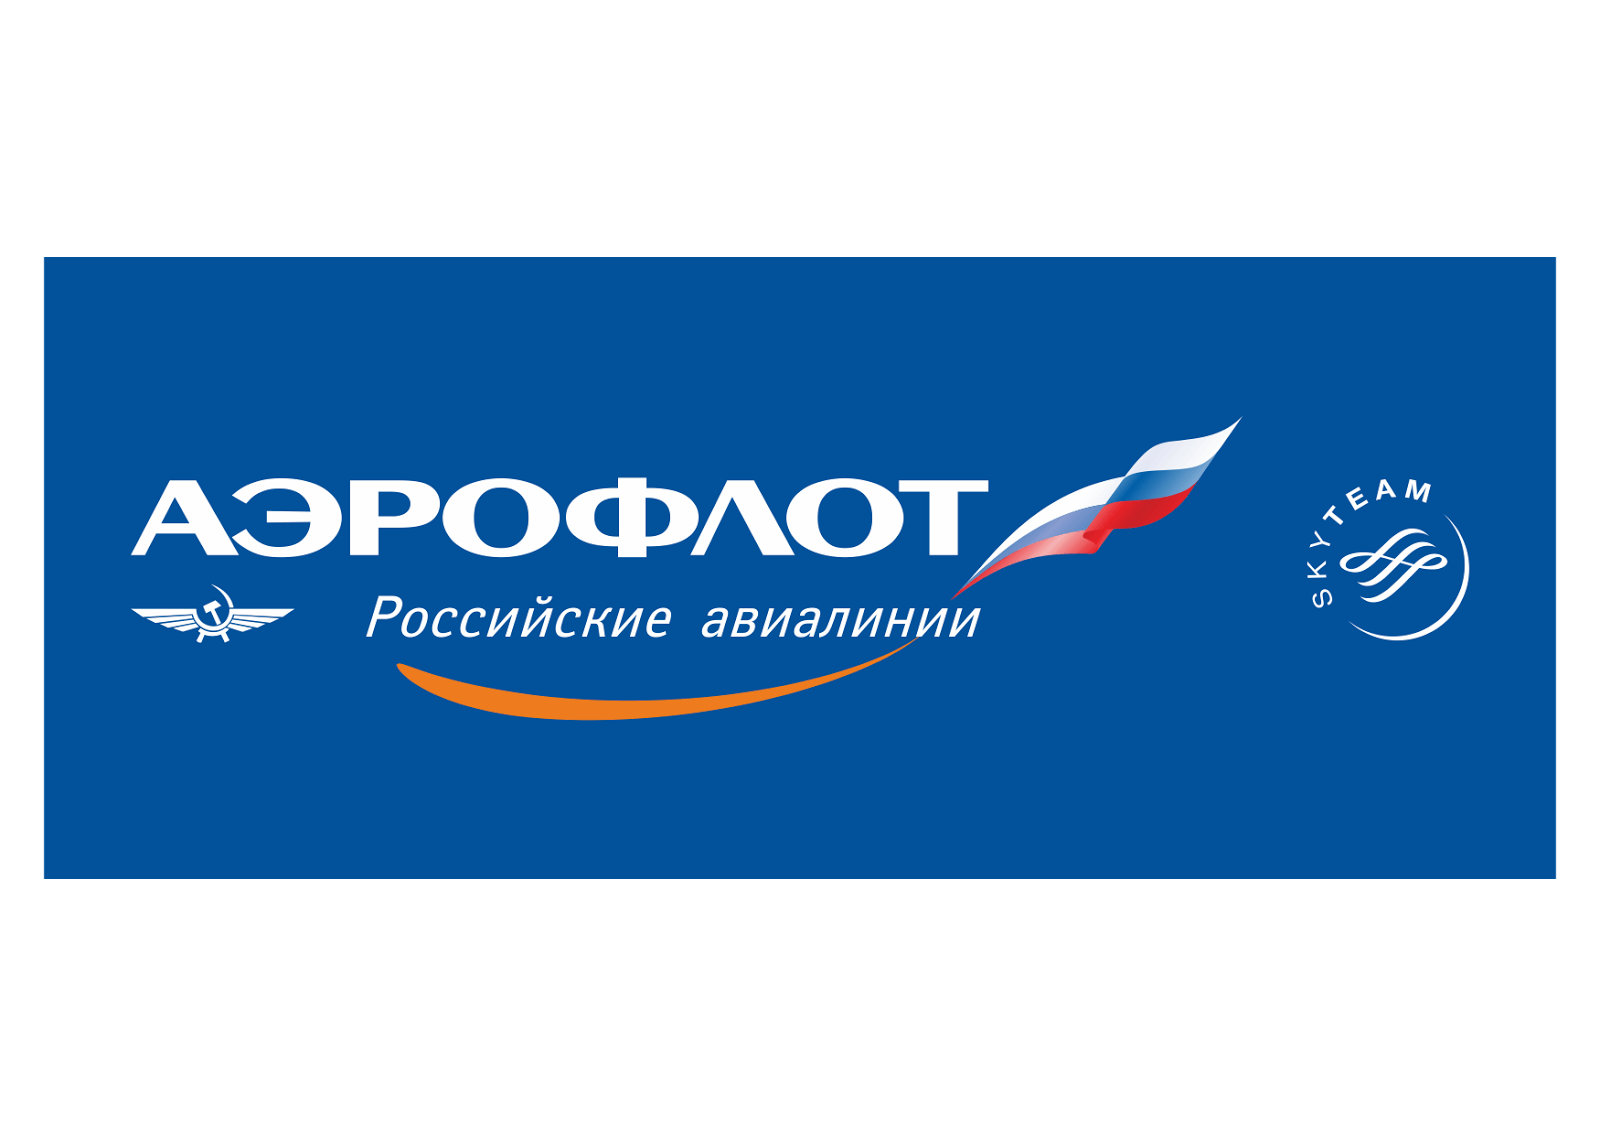 Russia Airline Logo - Aeroflot Russian Airlines Logo Vector Format Cdr Ai Eps Logo Image ...